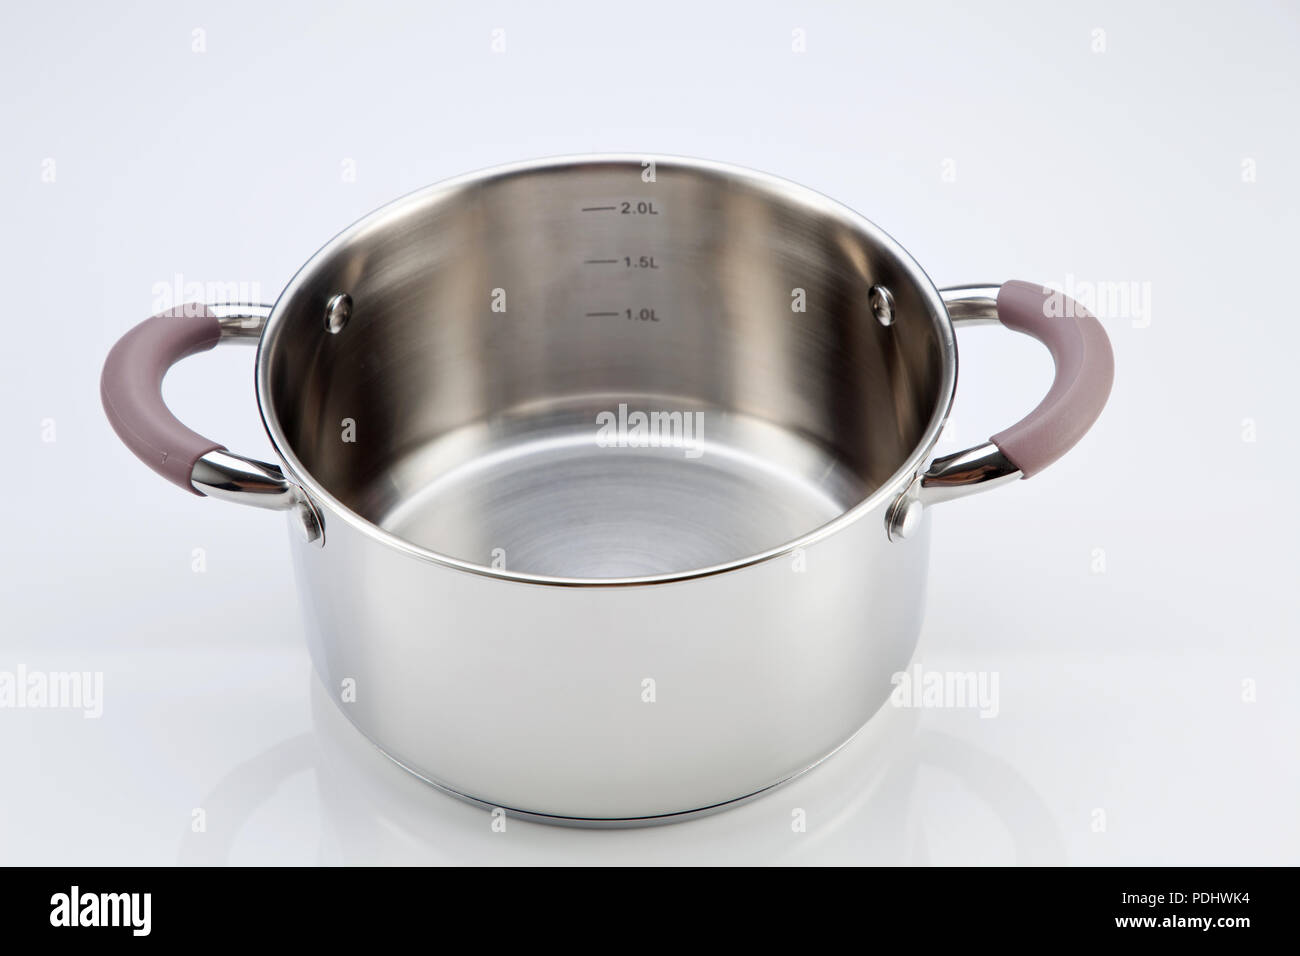 https://c8.alamy.com/comp/PDHWK4/empty-cooking-pot-on-the-white-background-PDHWK4.jpg